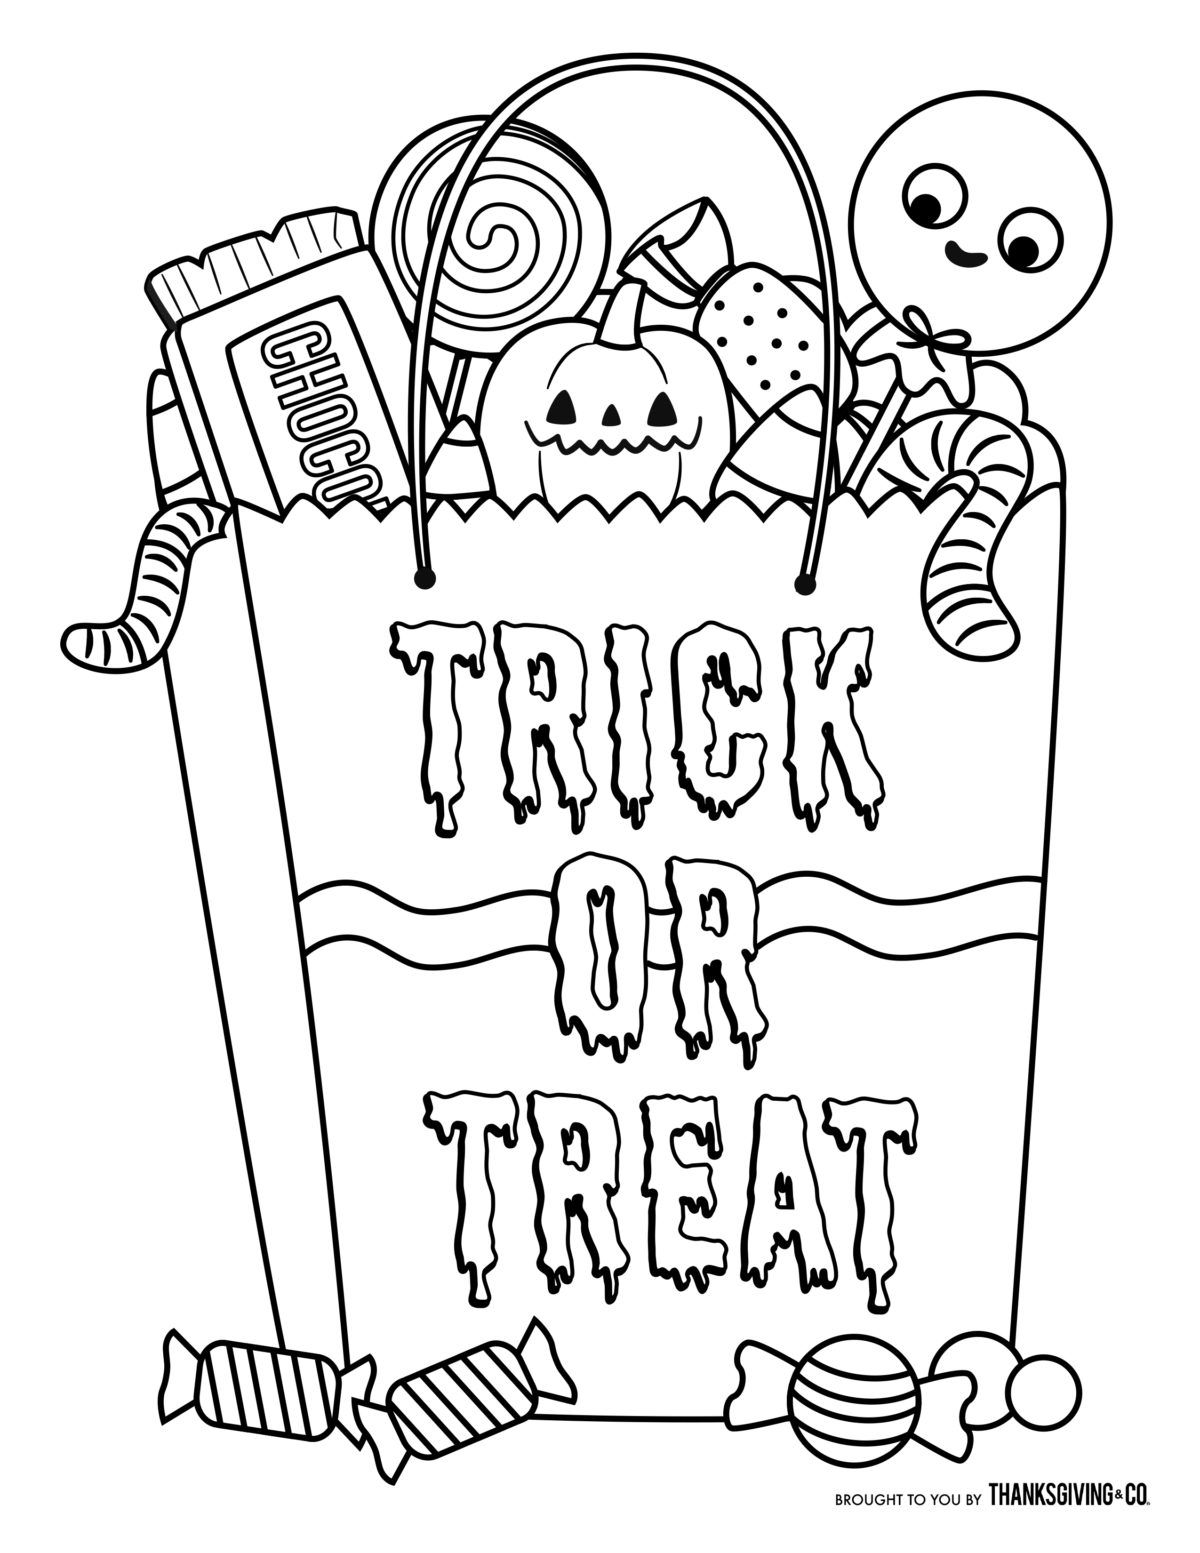 Trick Or Treat! Halloween Candy Bag Coloring Page | Halloween Coloring